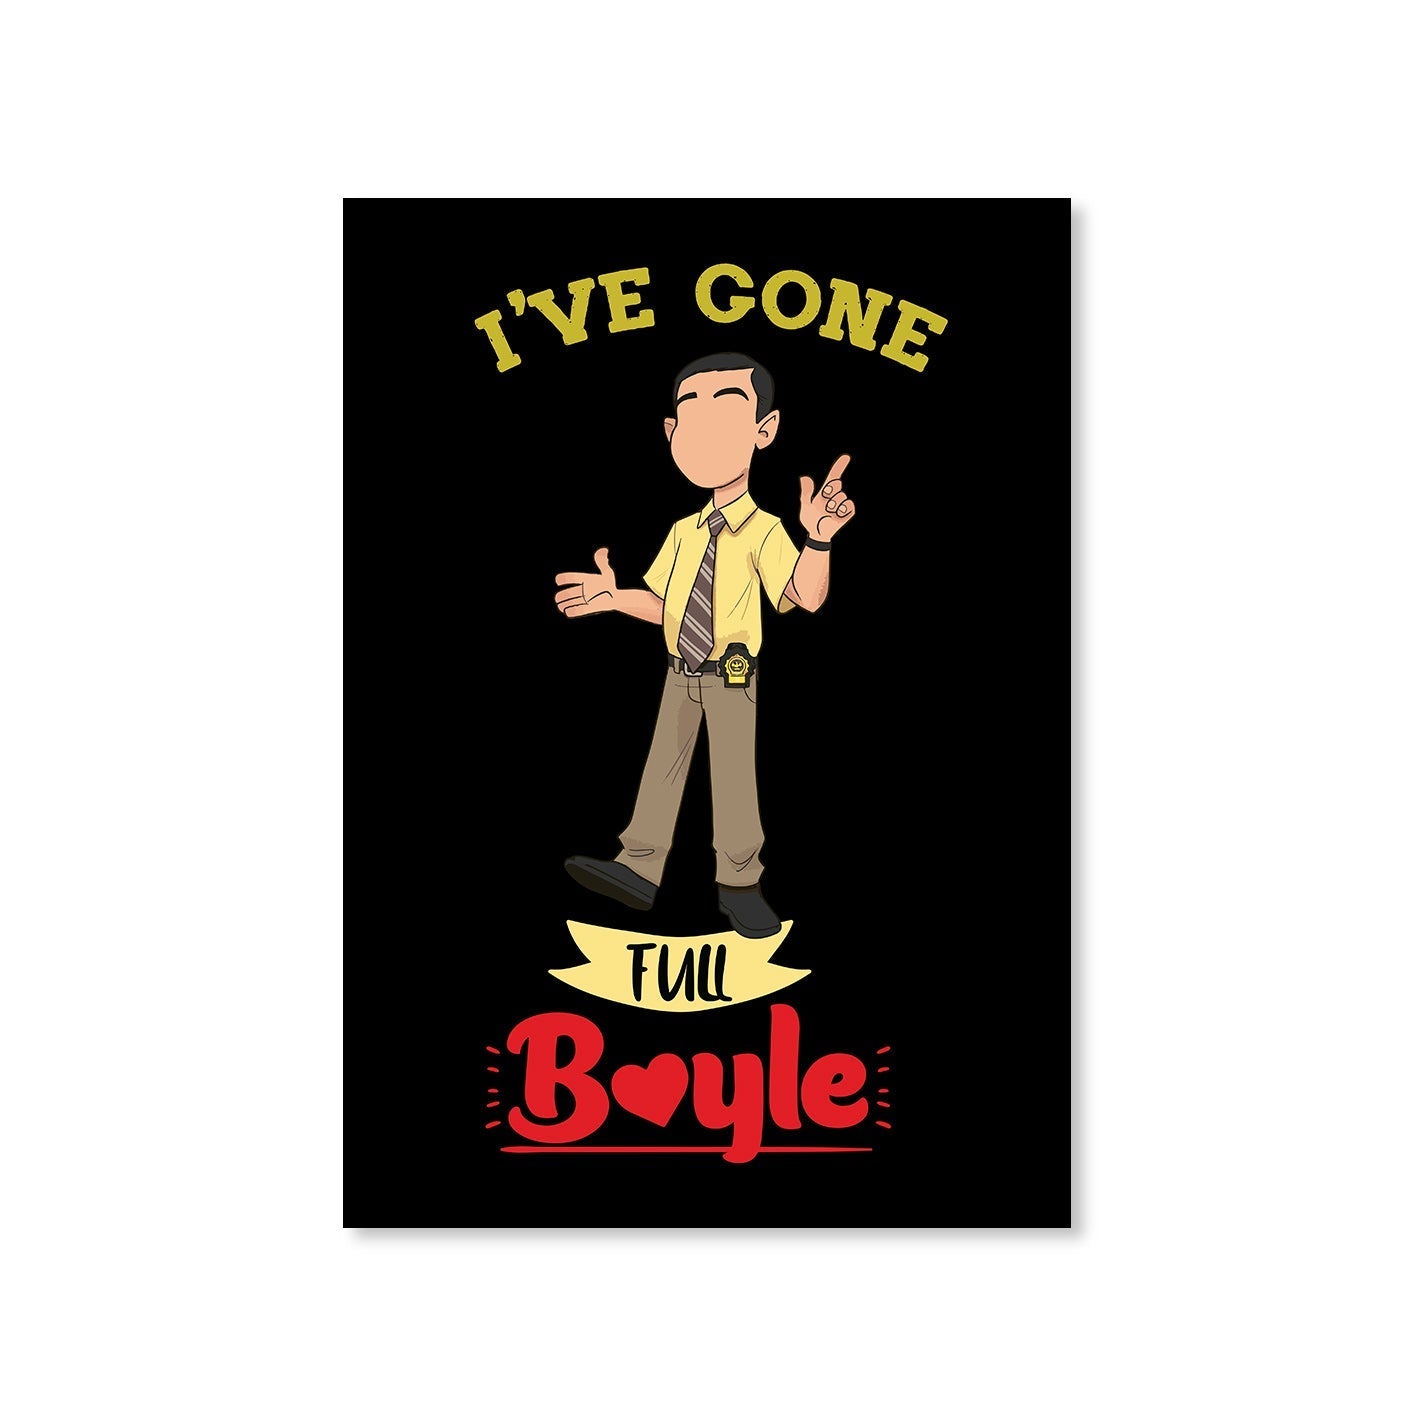 brooklyn nine-nine gone full boyle poster wall art buy online united states of america usa the banyan tee tbt a4 detective jake peralta terry charles boyle gina linetti andy samberg merchandise clothing acceessories